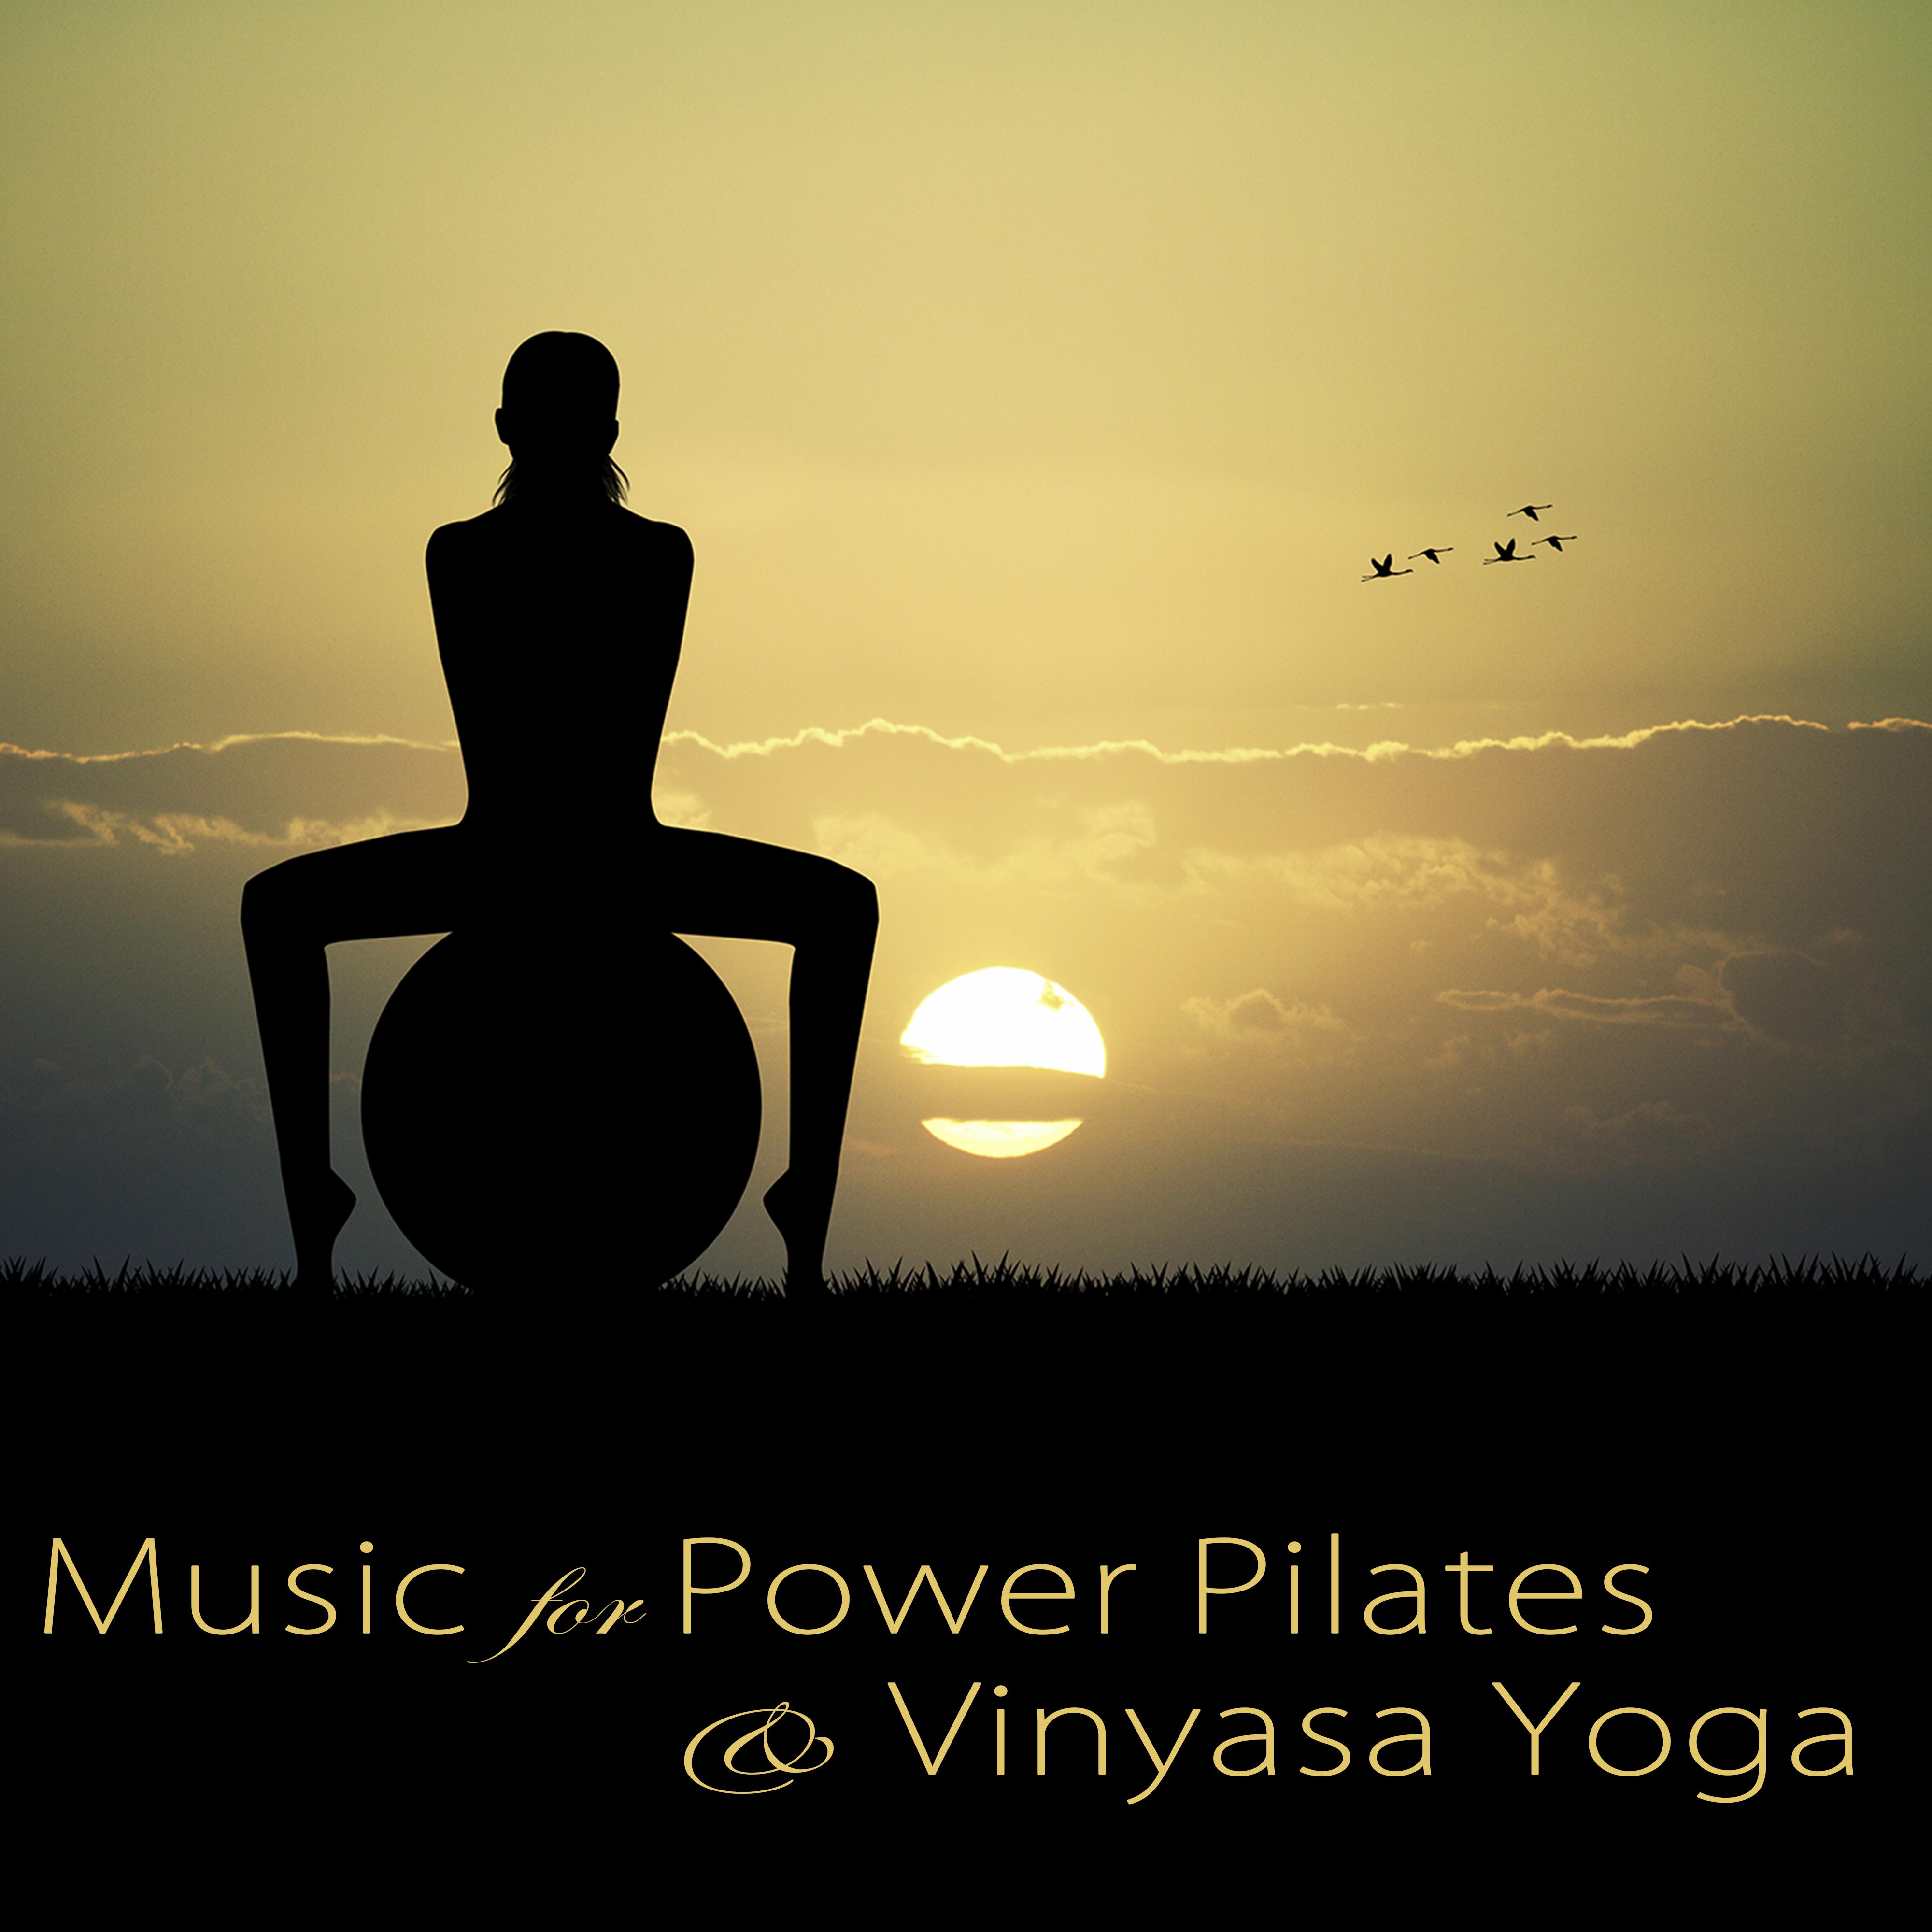 Music for Power Pilates & Vinyasa Yoga – Best Lounge Music & Relaxing Songs for Pilates Workout, Dynamic Yoga, Stretching, Yogalates & Cool Down